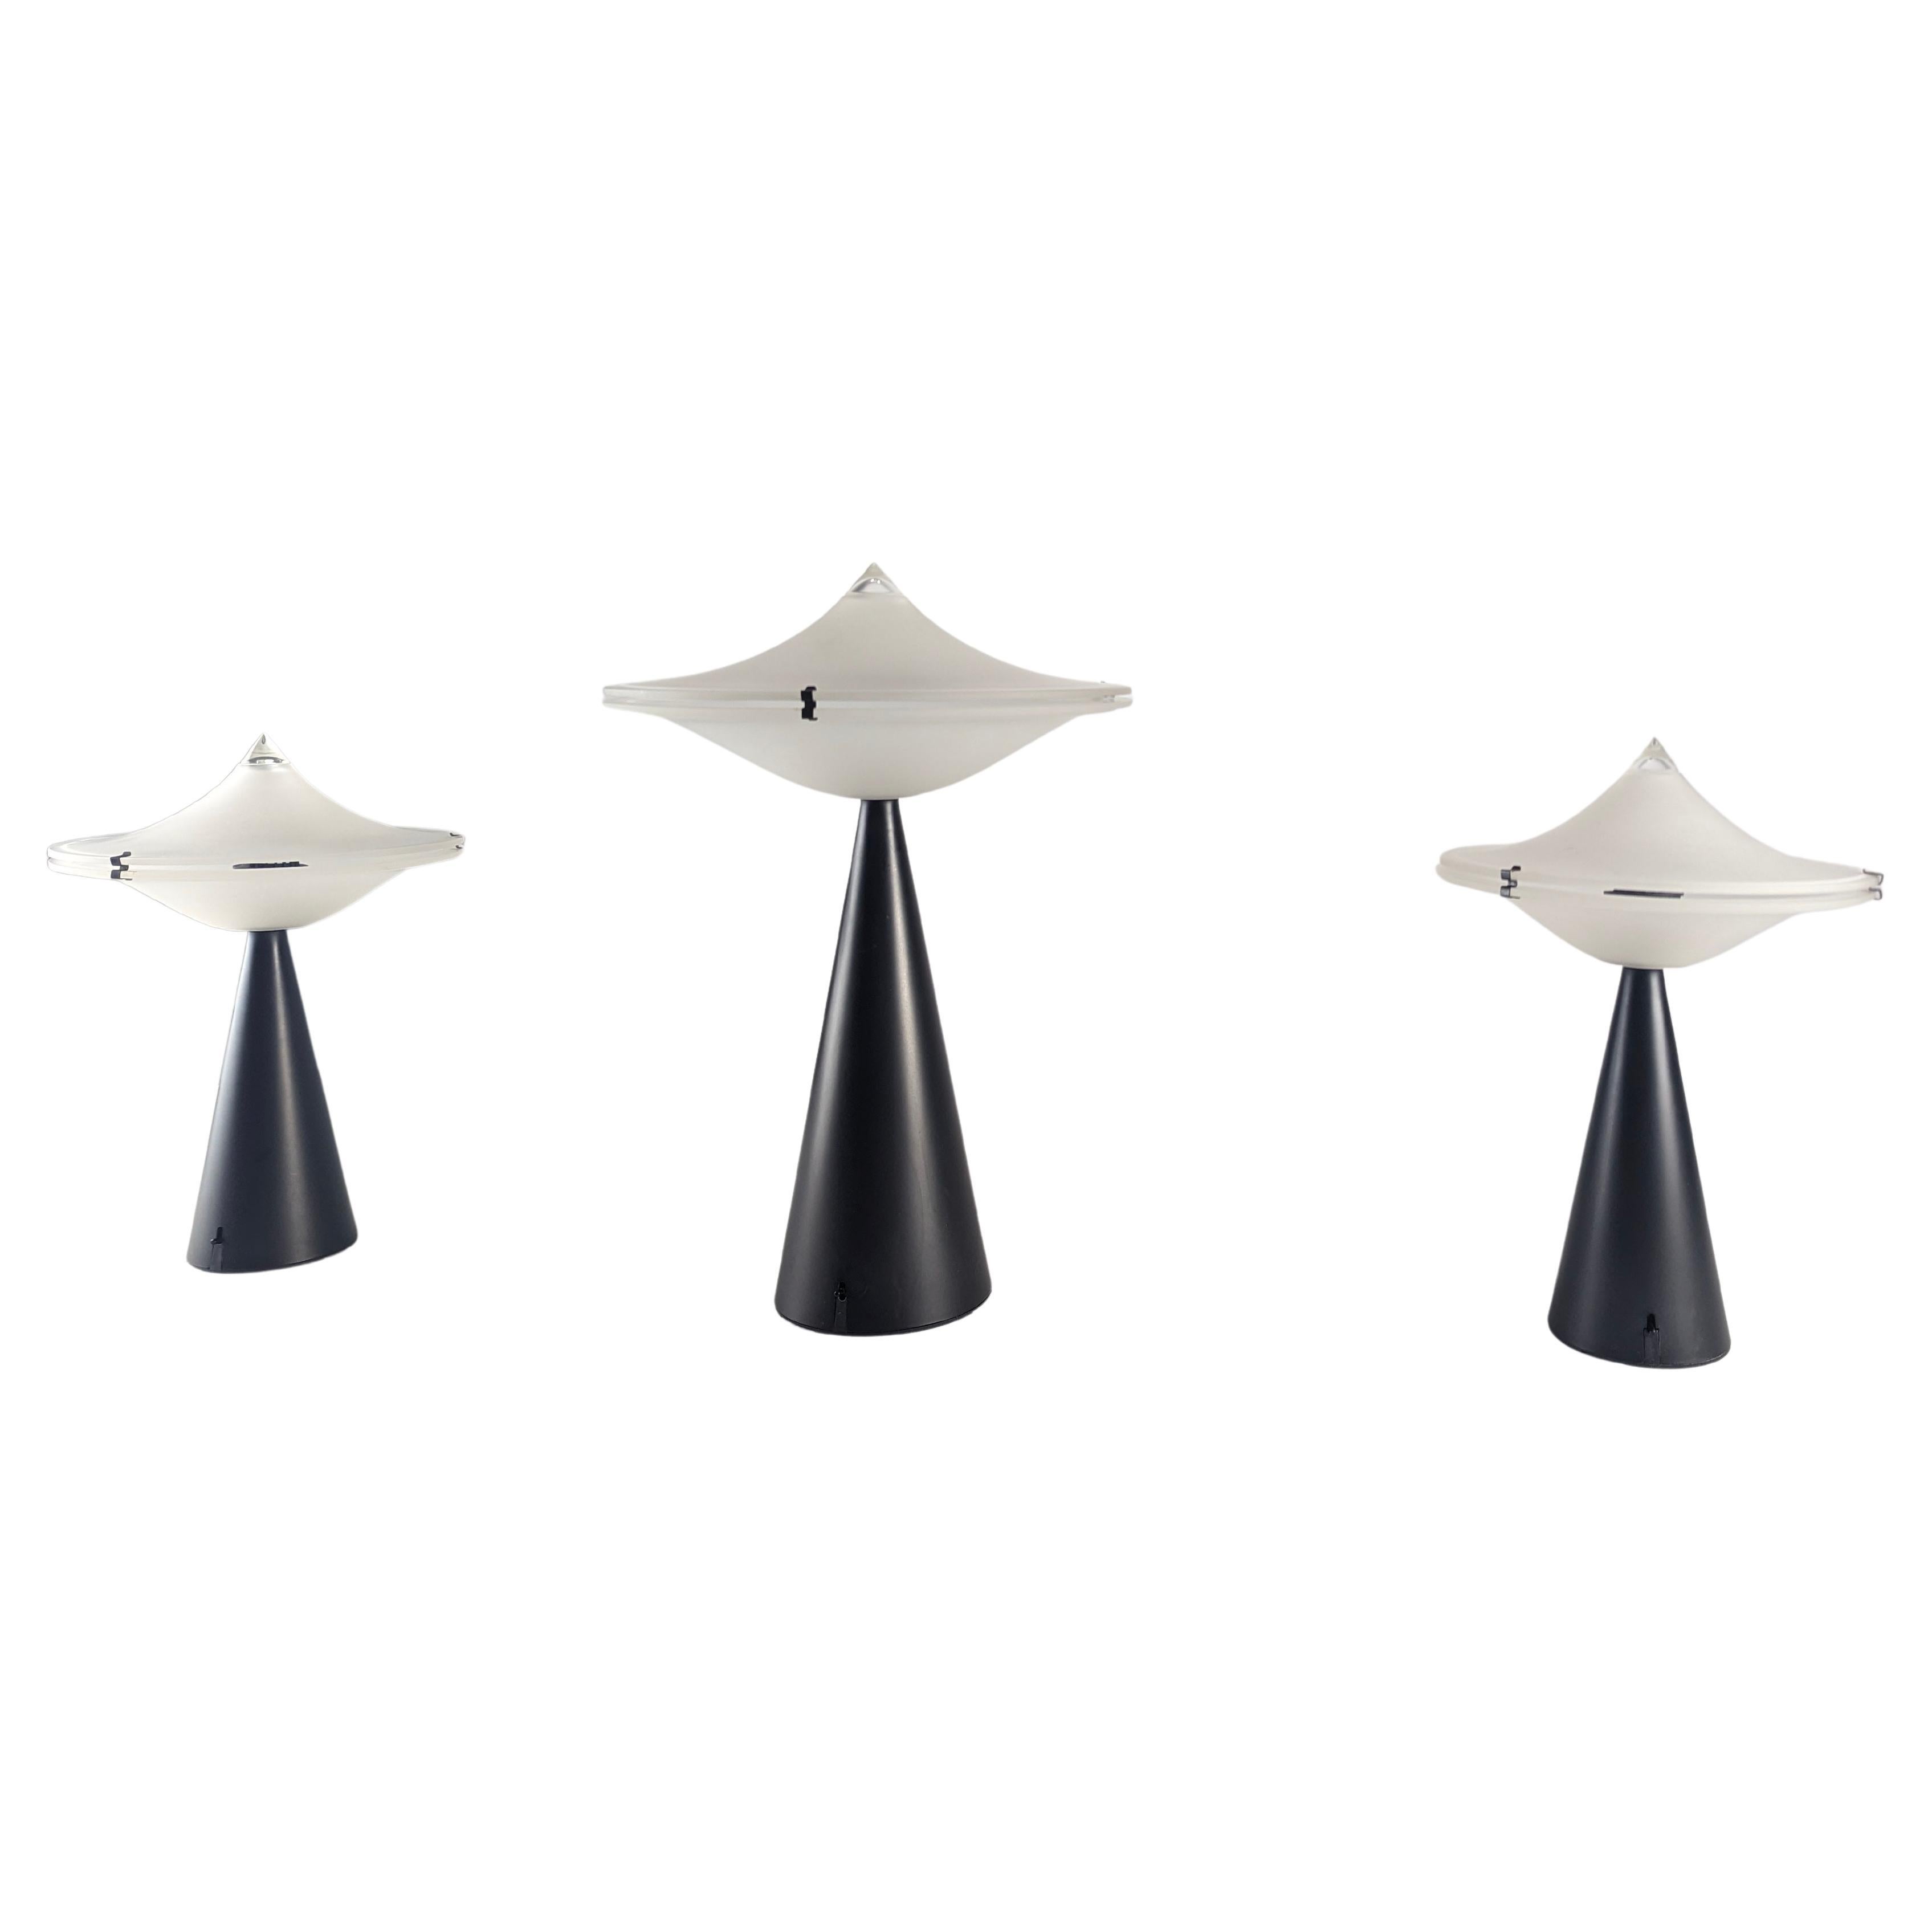 Alien Table lamp by Cesaro L. for Tre Ci/Luce, Italy 1970s Set of 3